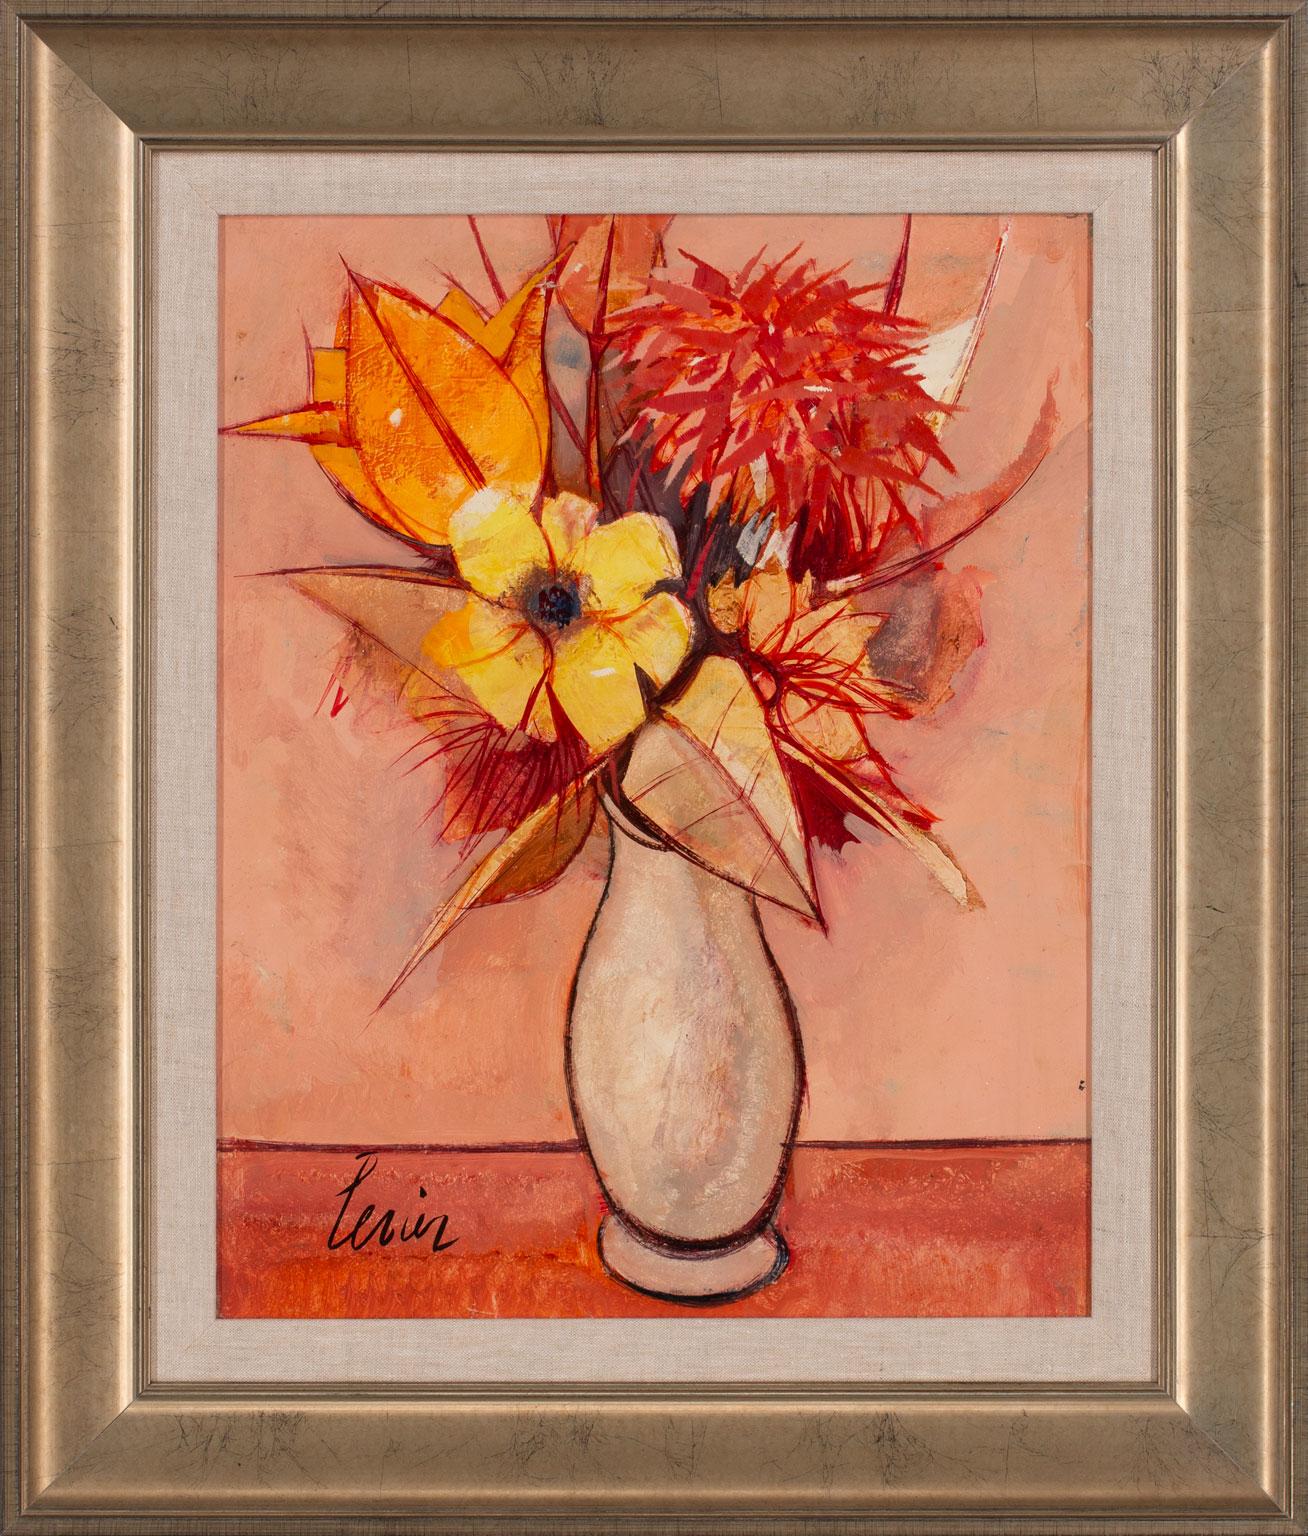 "Fleurs" Floral Still Life Oil Painting on Canvas by Charles Levier, Framed